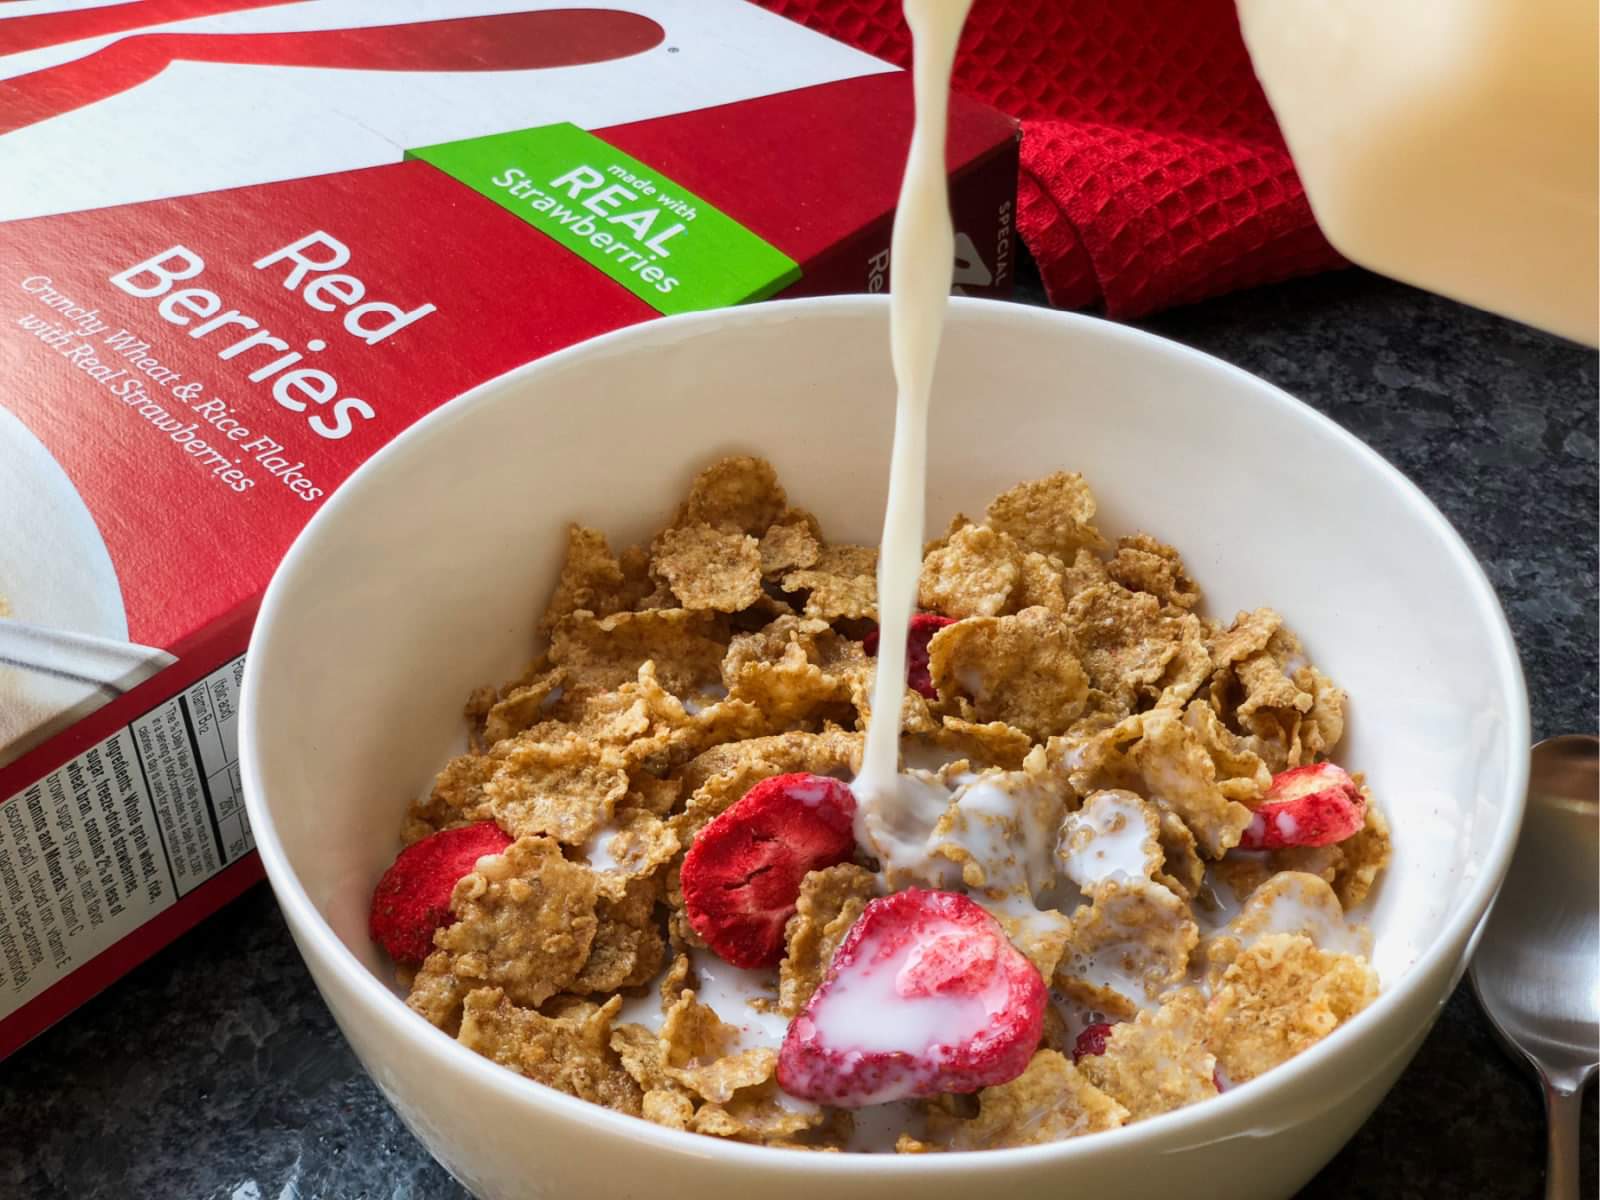 Get Boxes Of Kellogg’s Special K Cereal For Just $1.36 At Publix